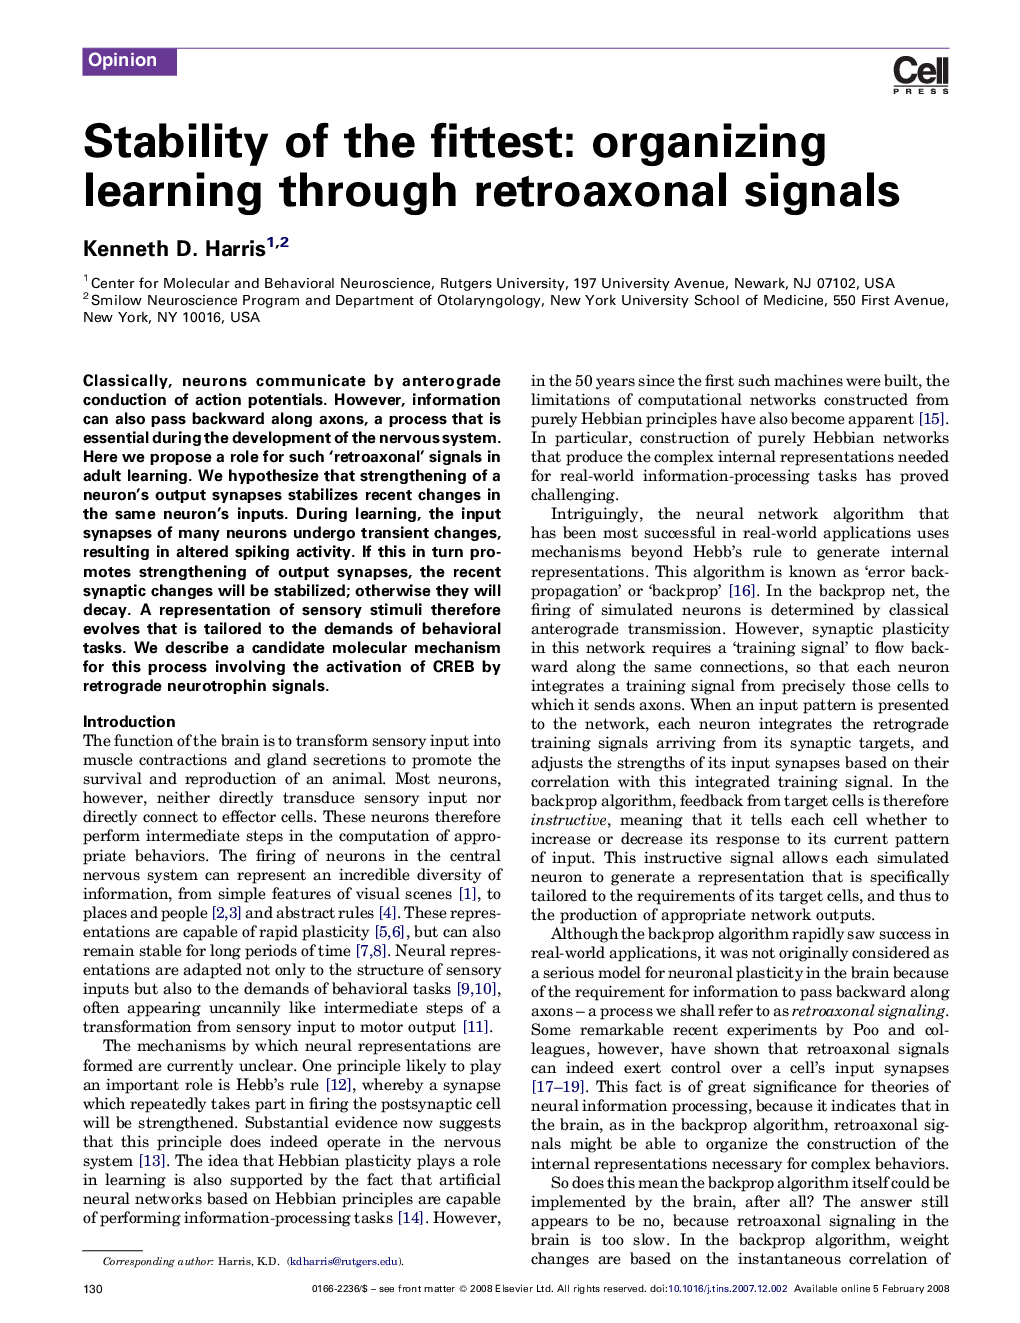 Stability of the fittest: organizing learning through retroaxonal signals